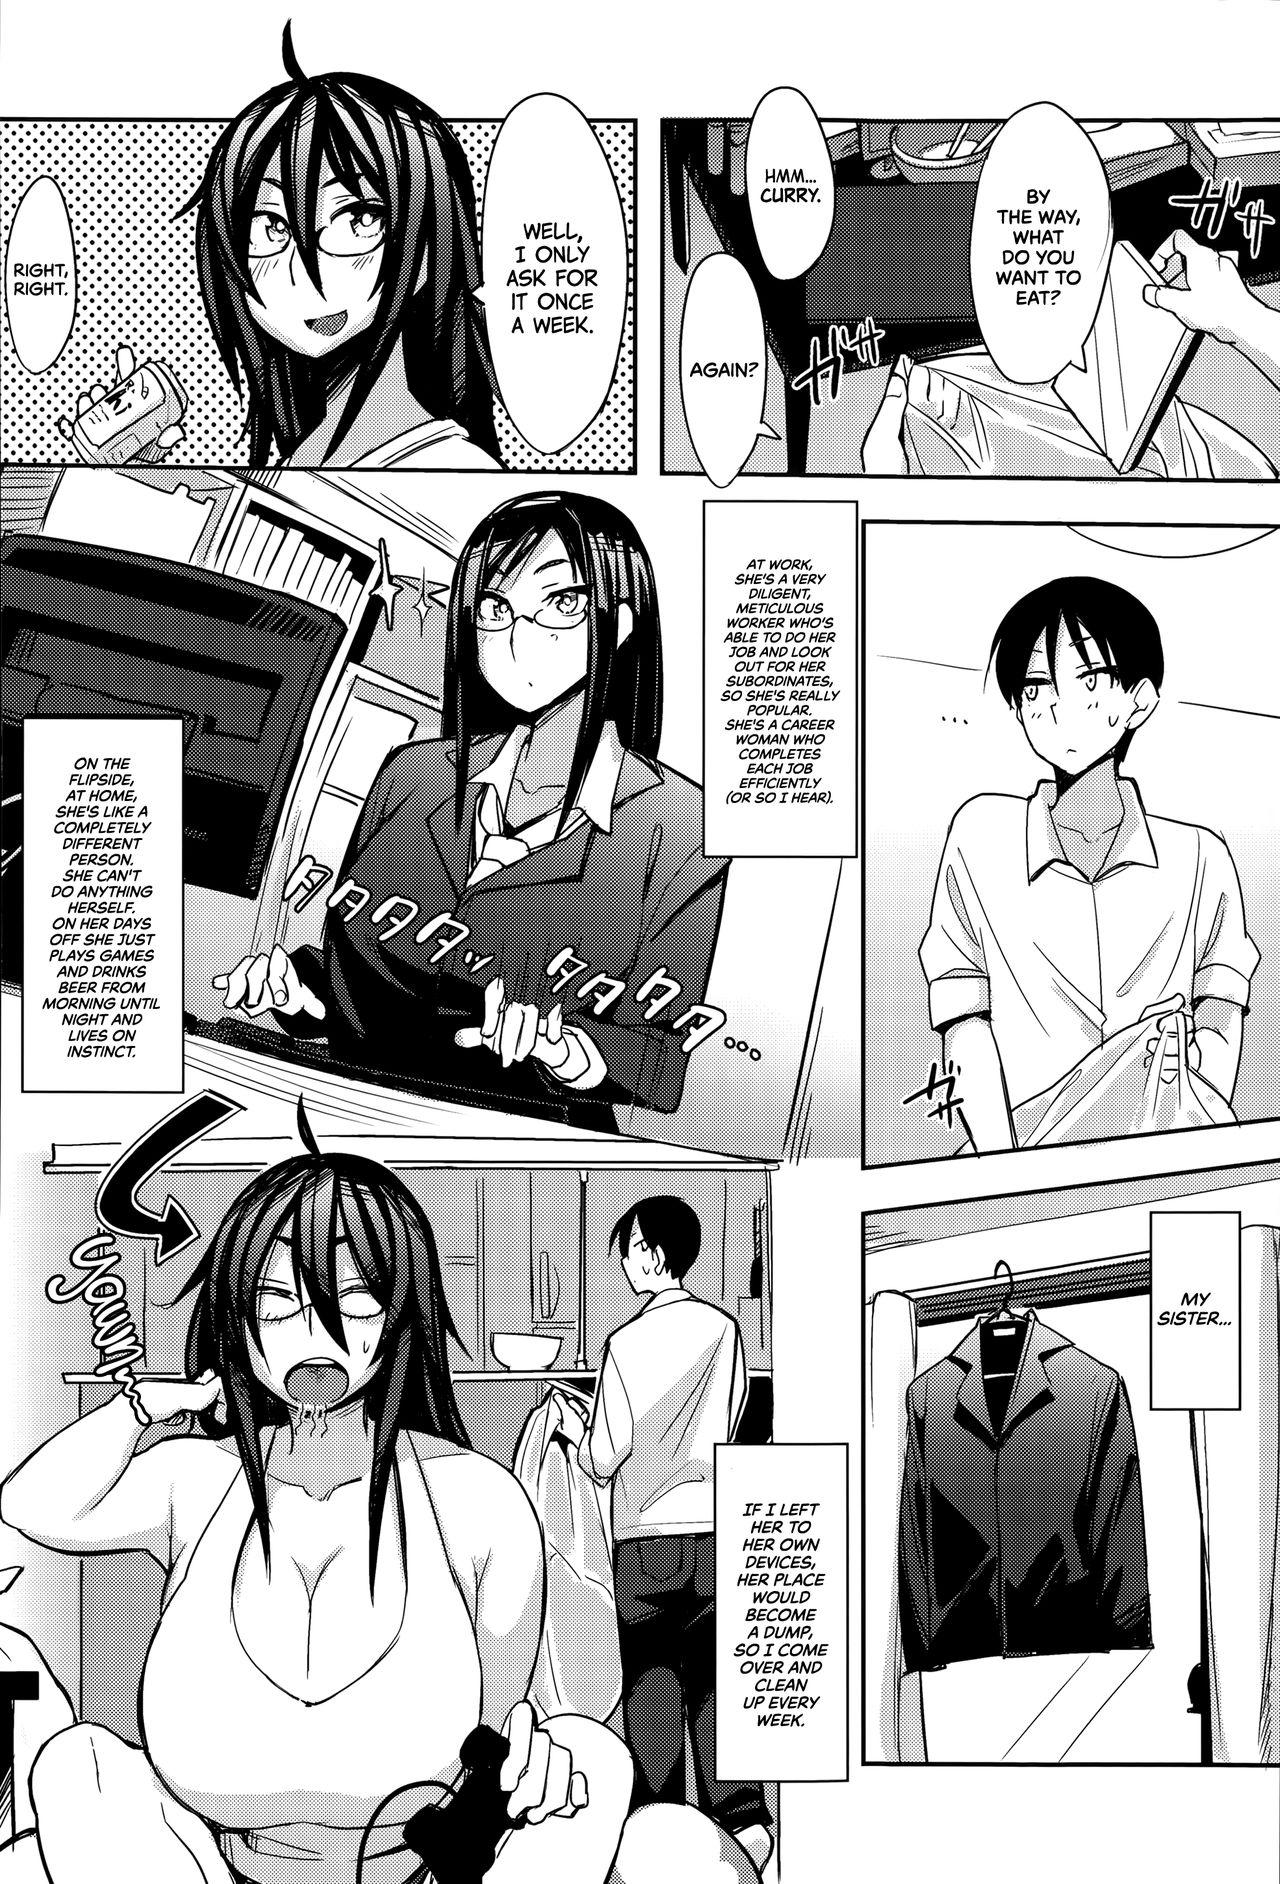 Interacial Onee-chan no Uragao | My Sister's Other Side Sex Toys - Page 2